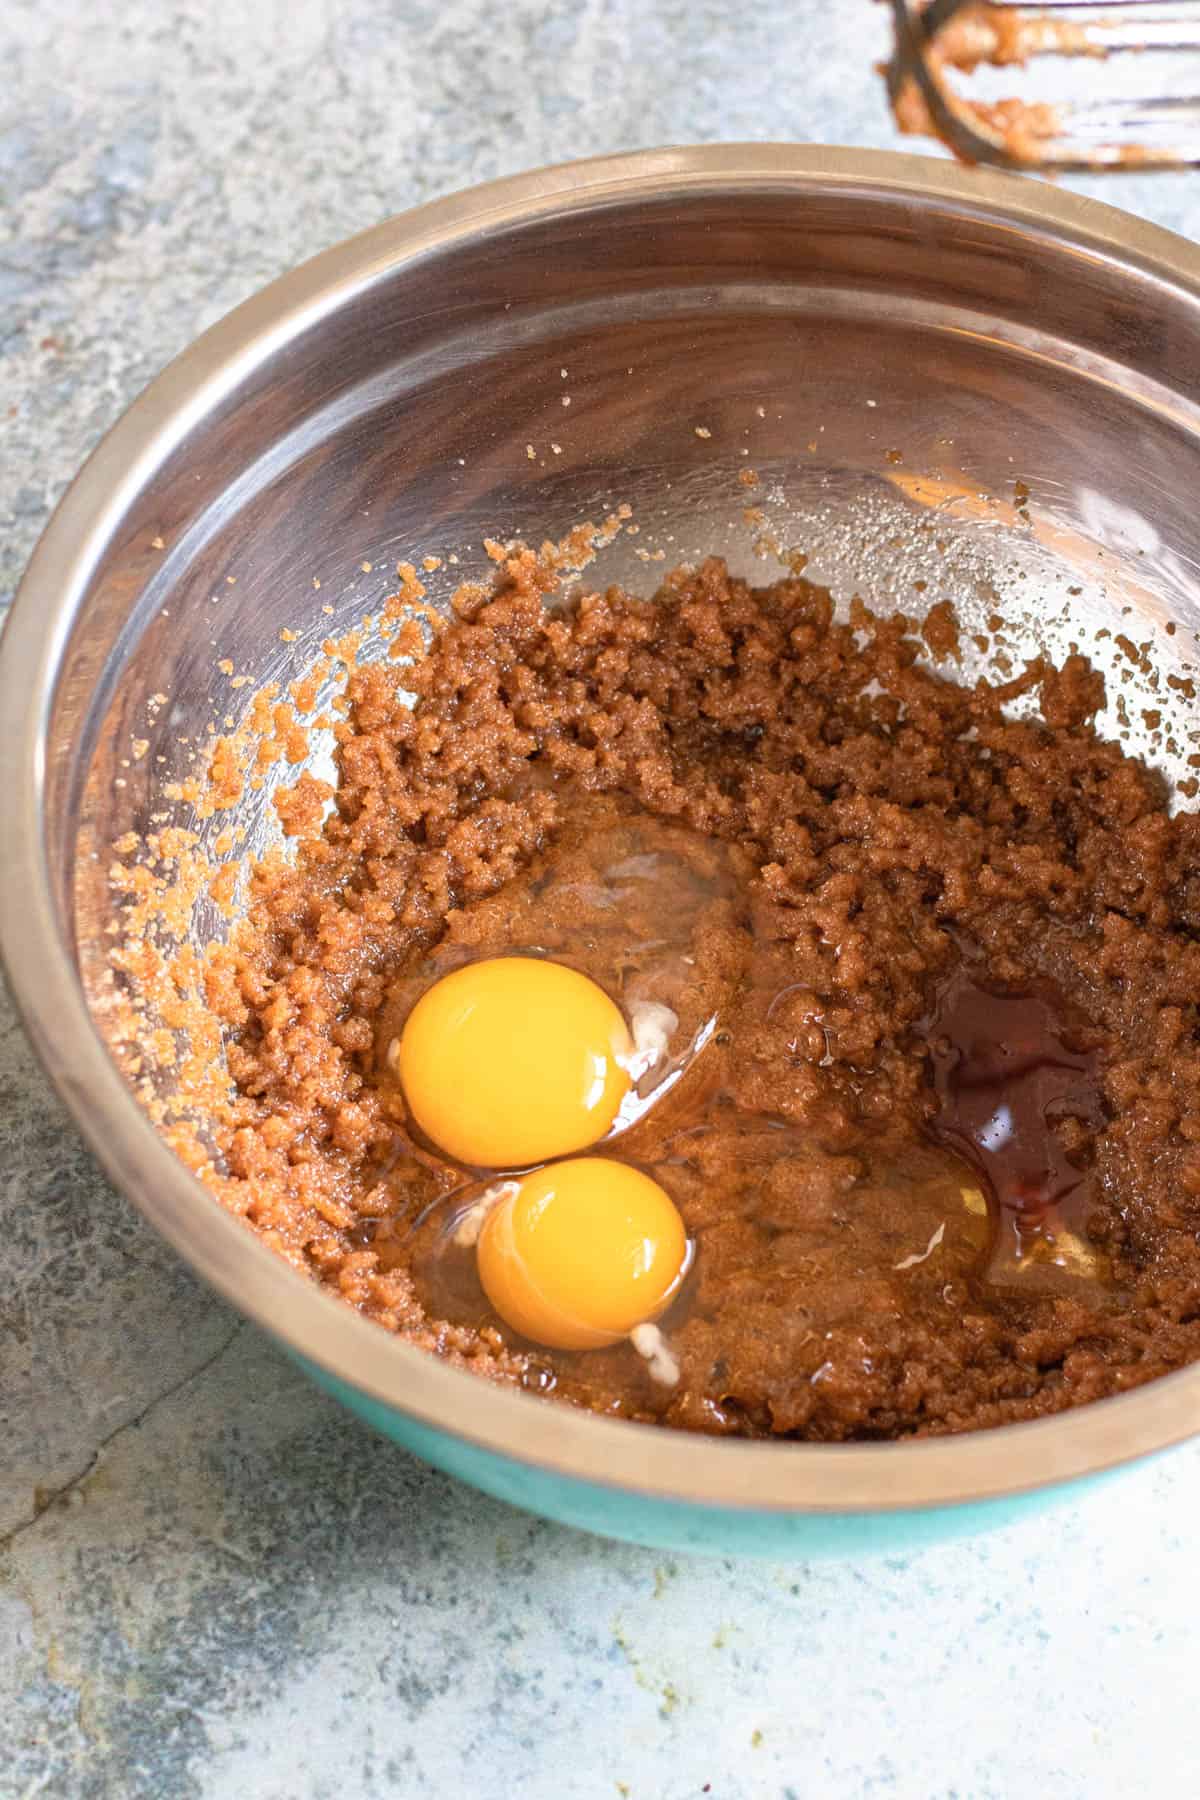 Eggs added to a mixing bowl to make brownies.